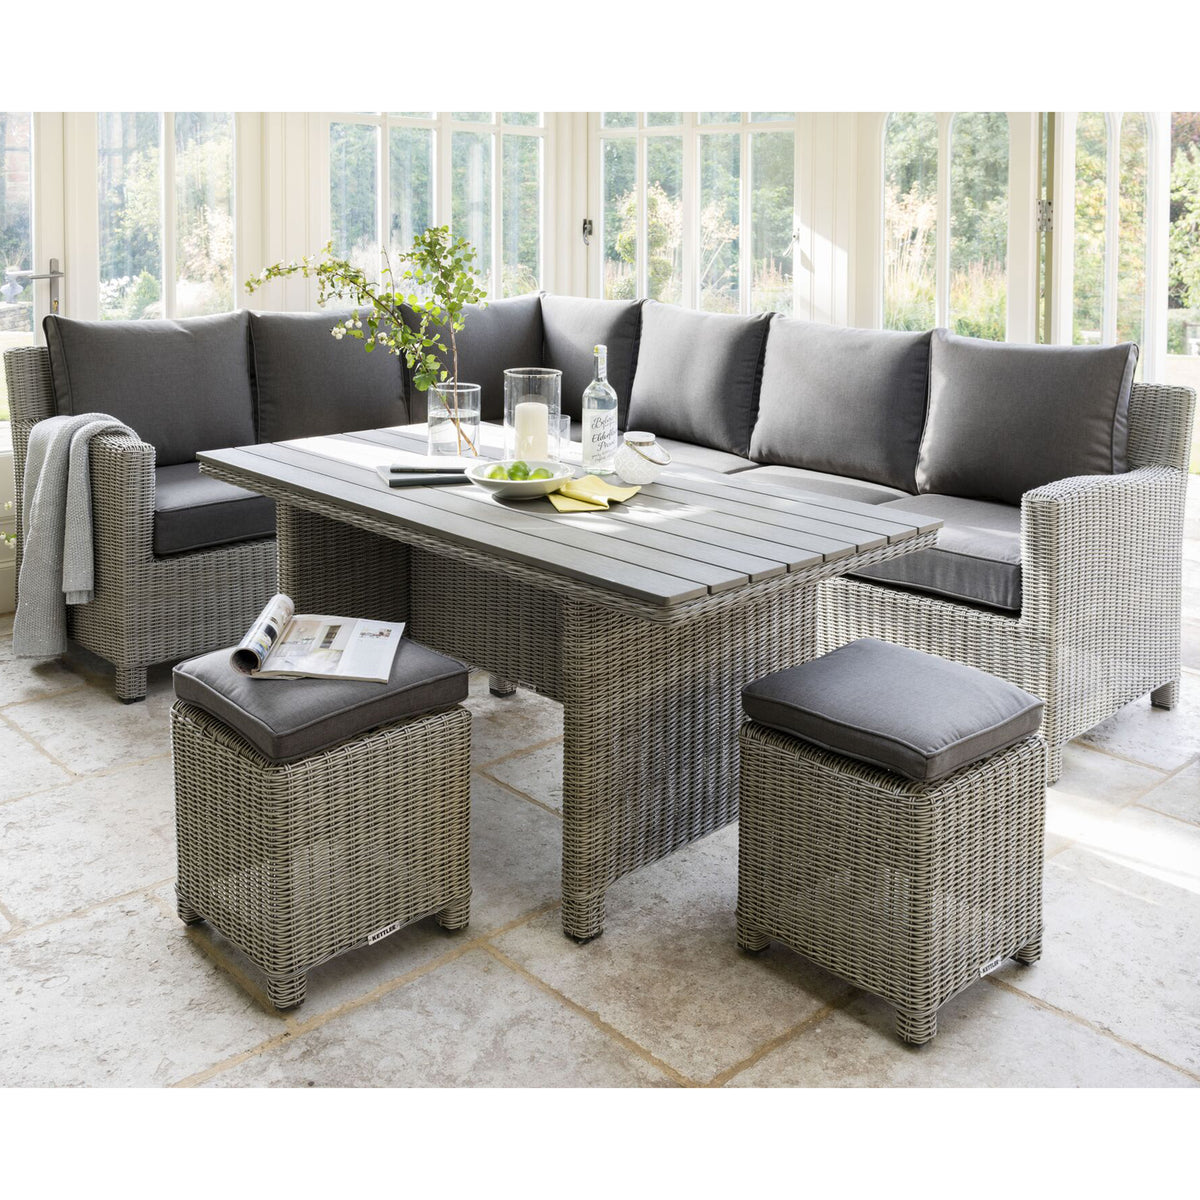 Kettler Palma Corner Right Hand White Wash Wicker Outdoor Sofa Set with Slat Top Table